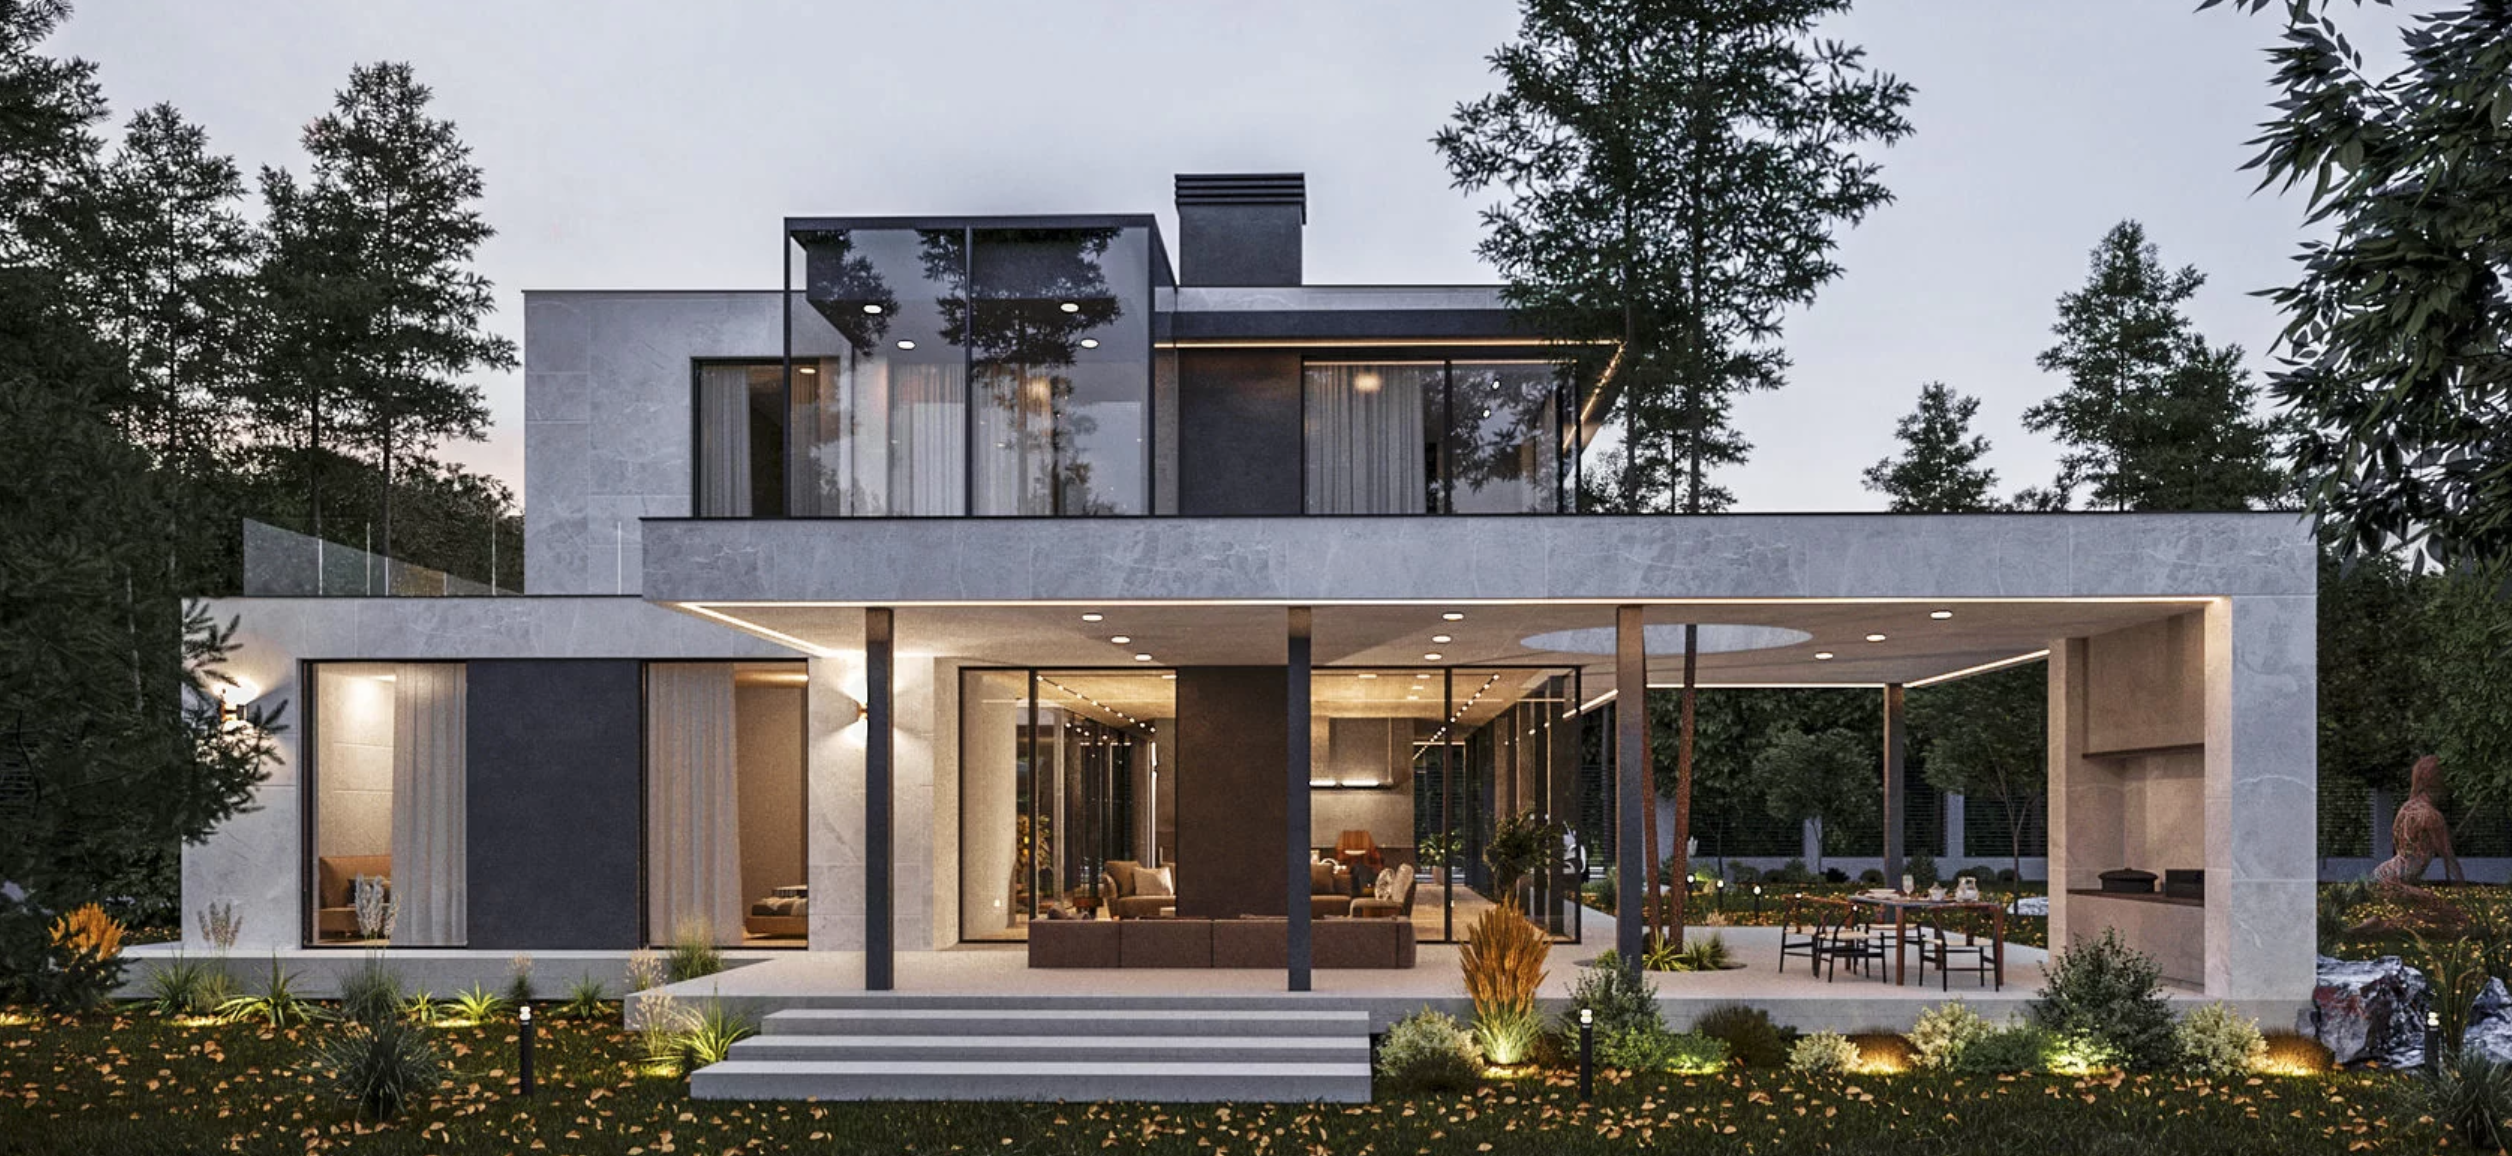 Modern house architecture